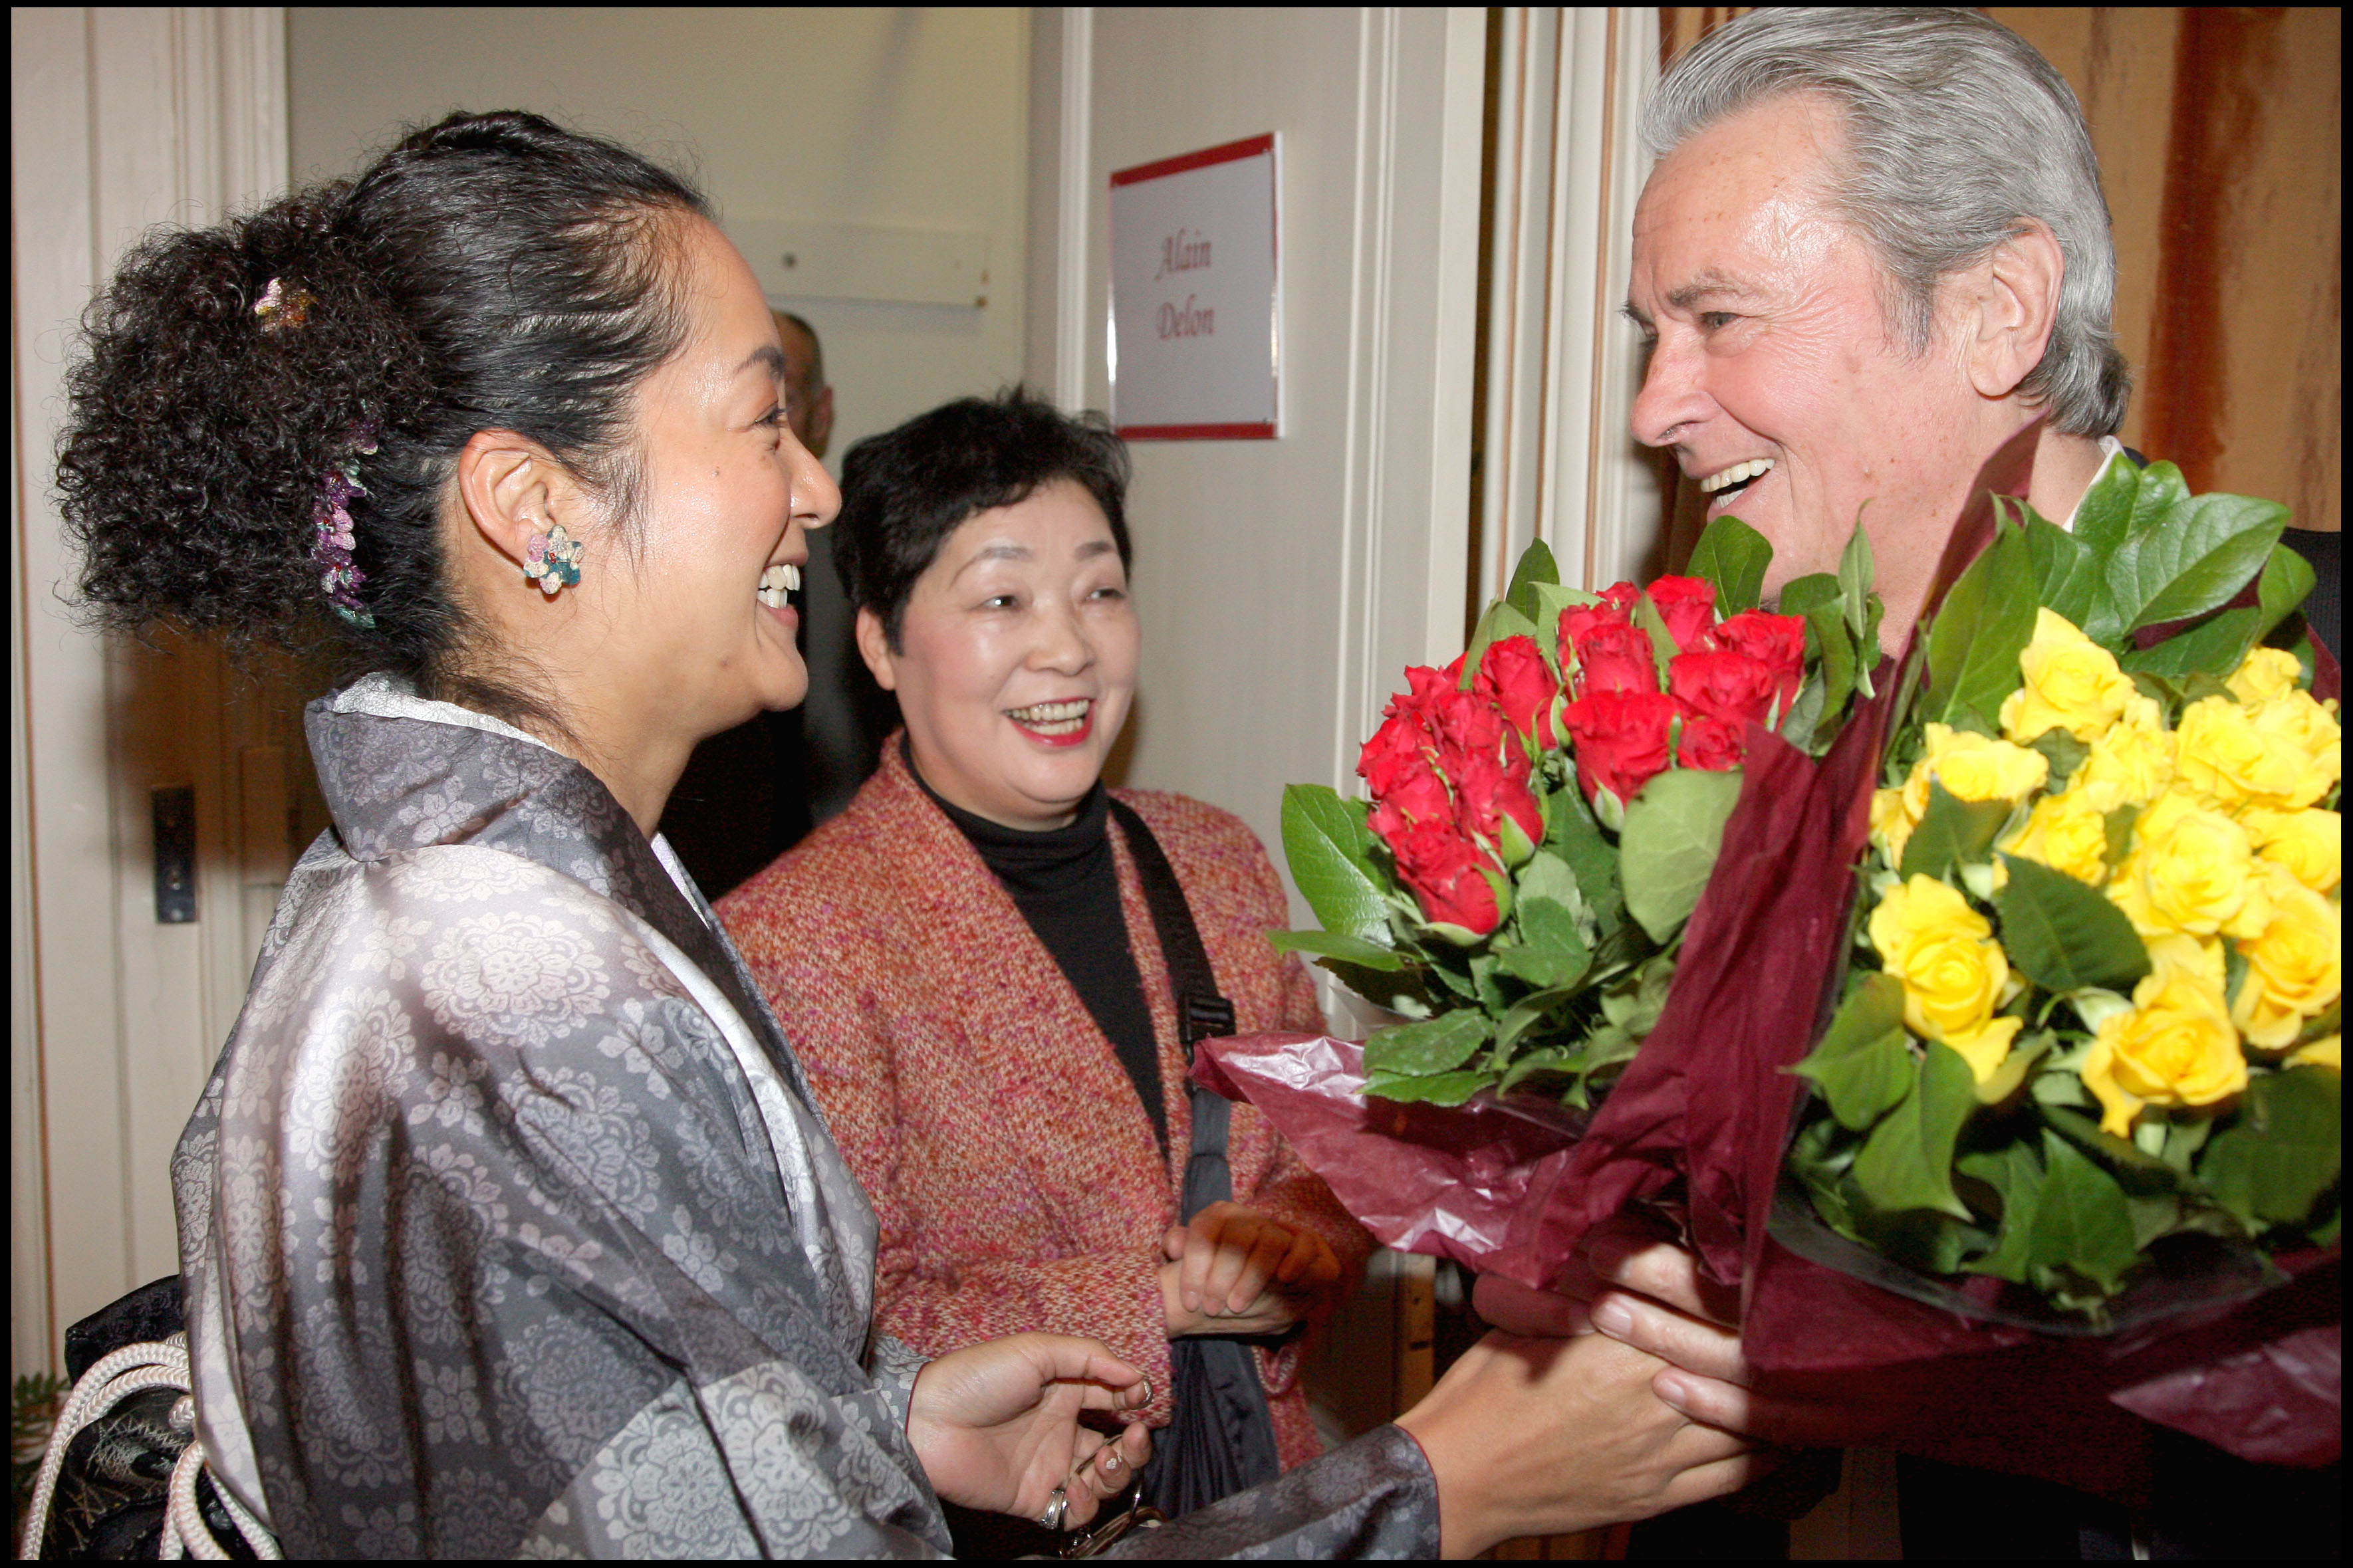 Alain Delon receiving flowers from fans who flew from Japan to see him in the theatre show "Love Letters" in Paris, France in 2008. | Source: Getty Images